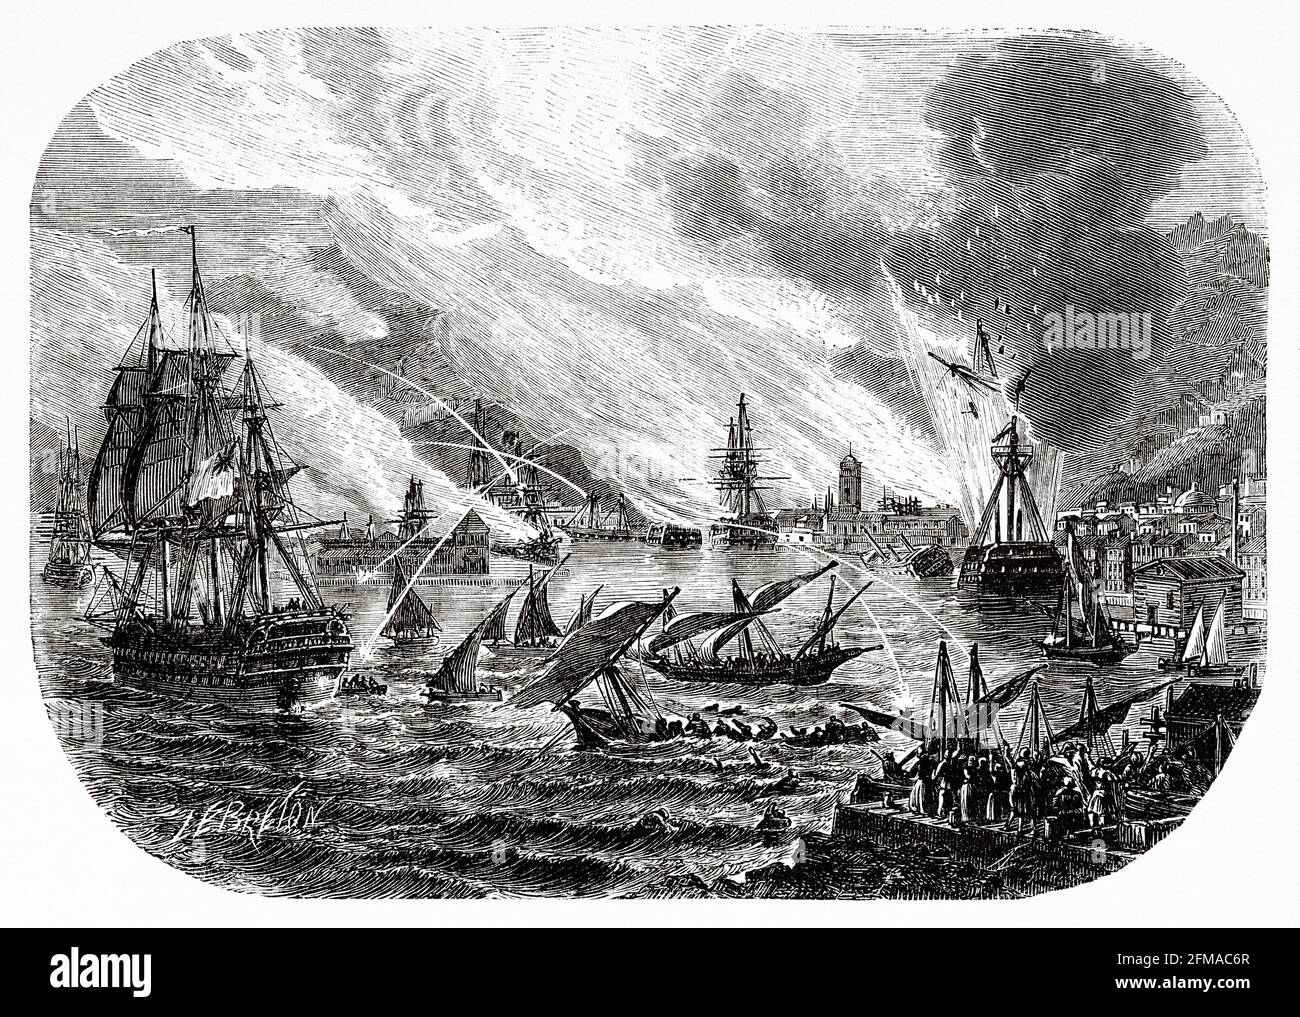 Siege of Toulon. Revolt of the port of Toulon against its own country France in 1793. Combined fleets of Spain and Great Britain invade the south of France through the port of Toulon. France. Old 19th century engraved illustration from Histoire de la Revolution Francaise 1876 by Jules Michelet (1798-1874) Stock Photo